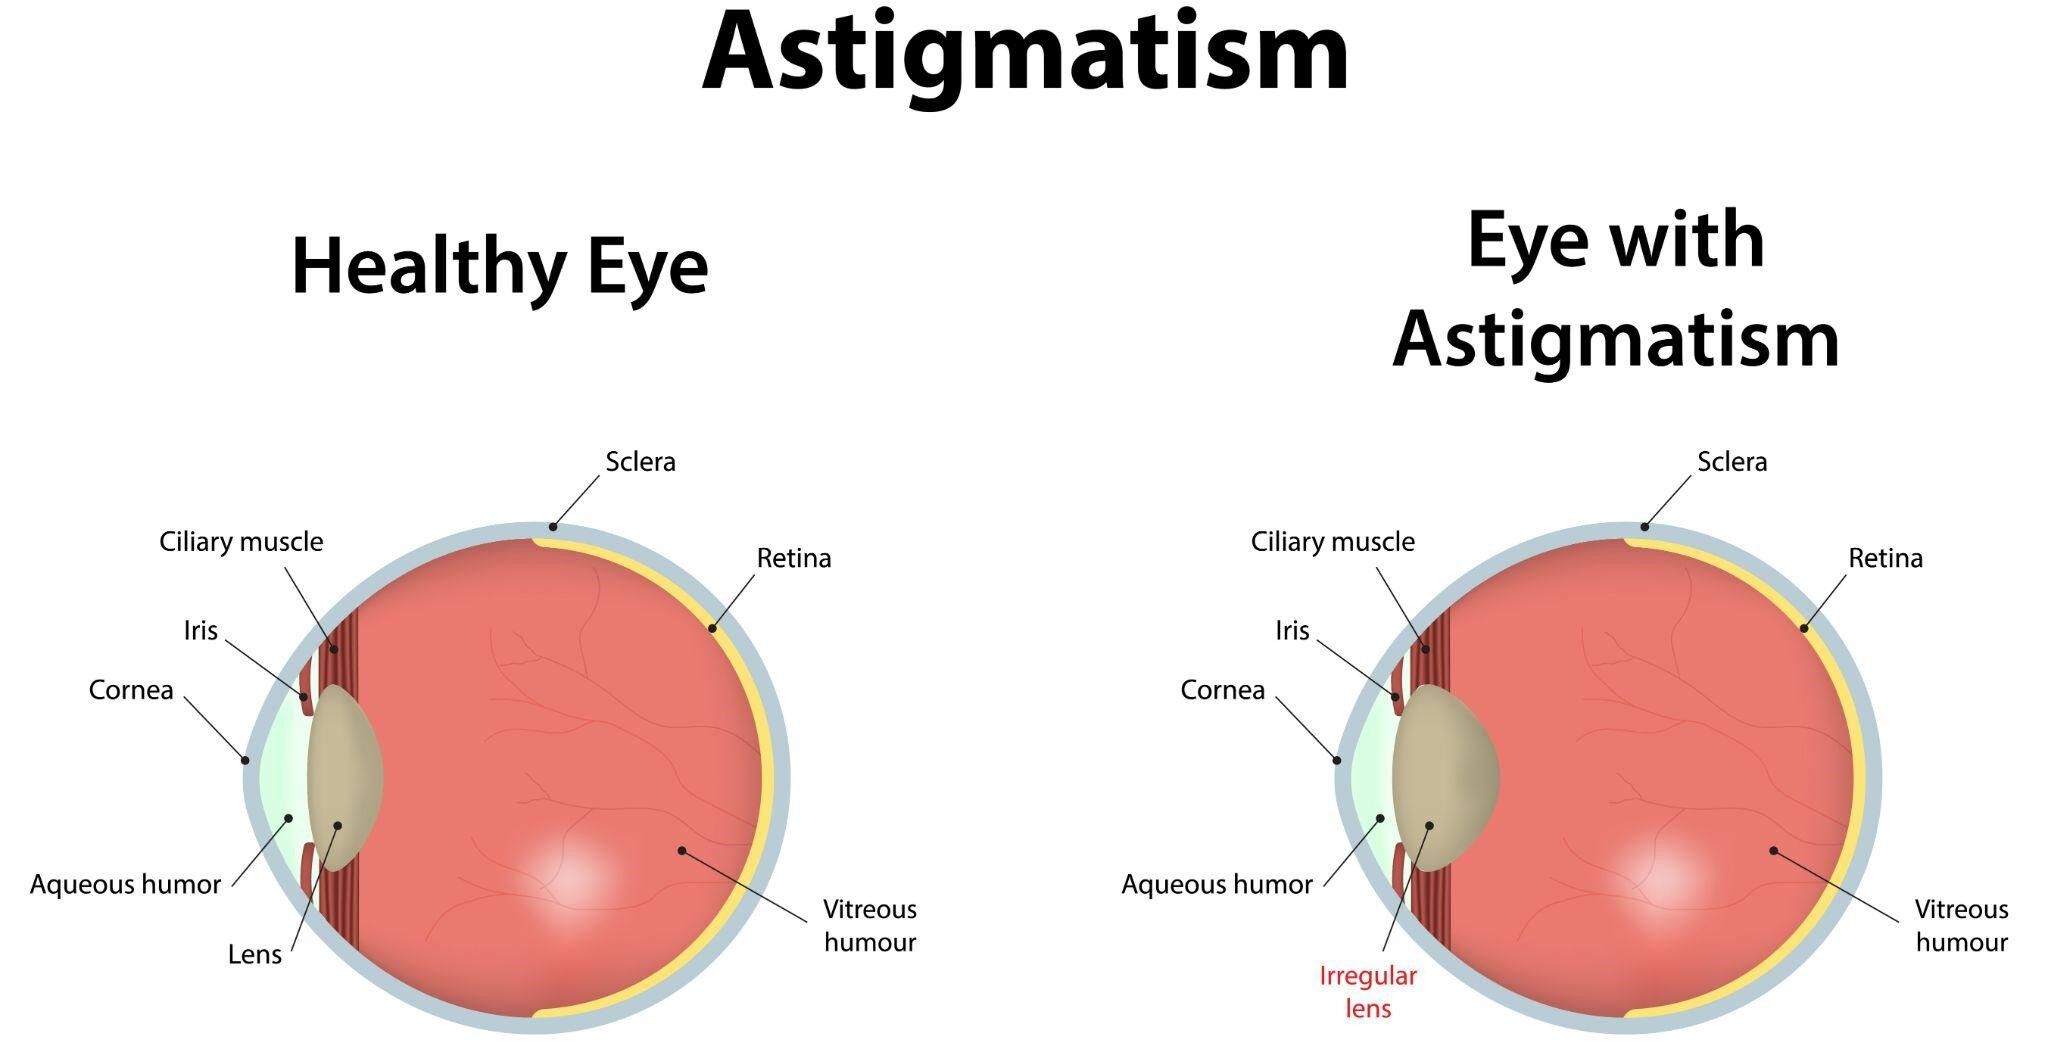 Illustration of a healthy eye and an eye with astigmatism